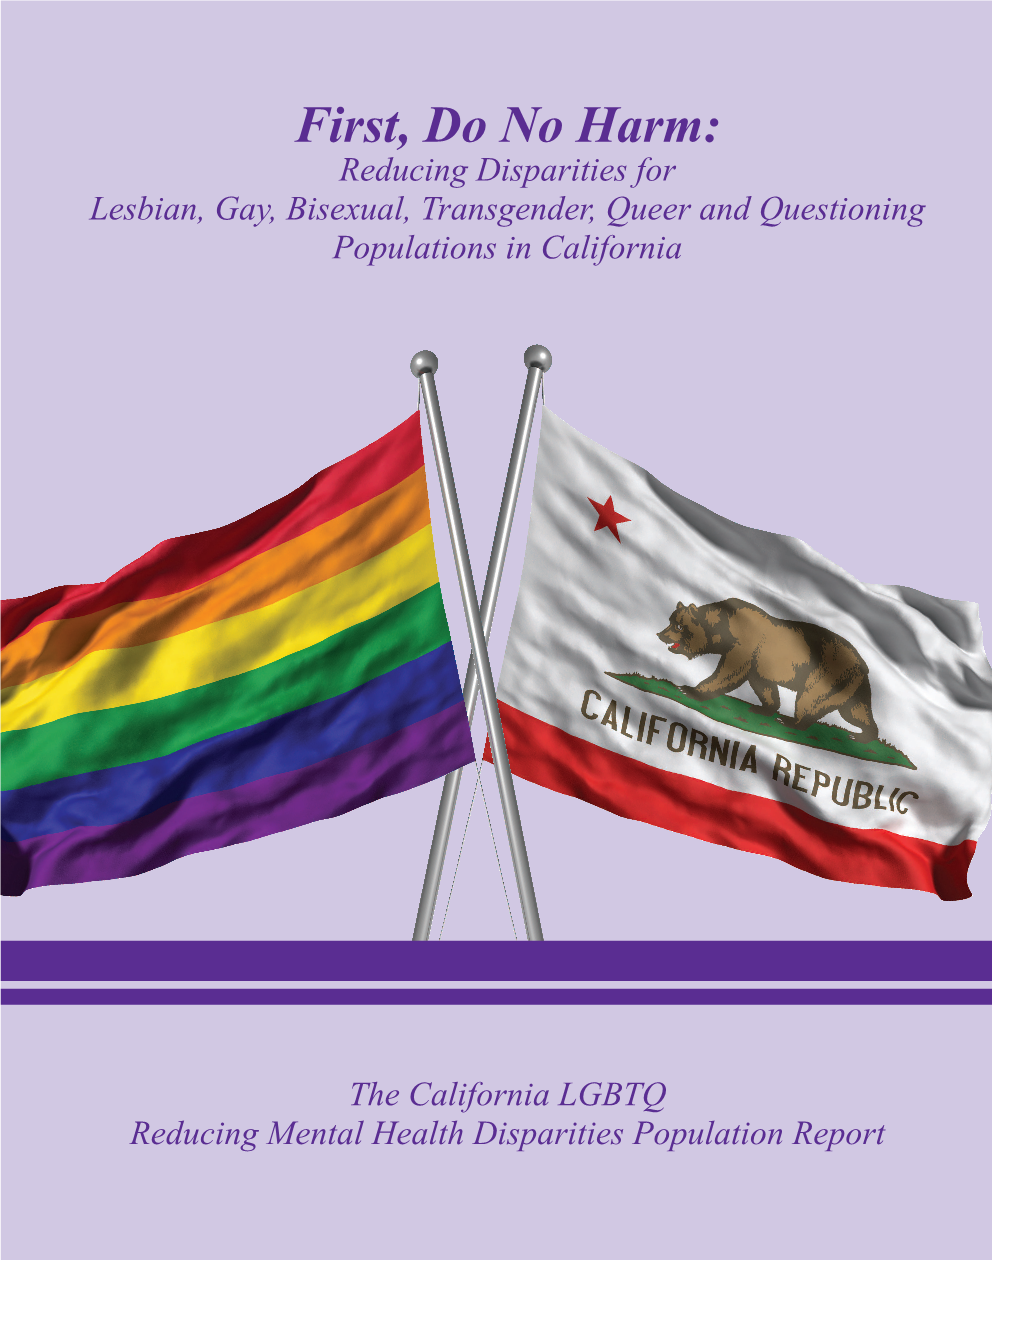 First, Do No Harm: Reducing Disparities for Lesbian, Gay, Bisexual, Transgender, Queer and Questioning Populations in California